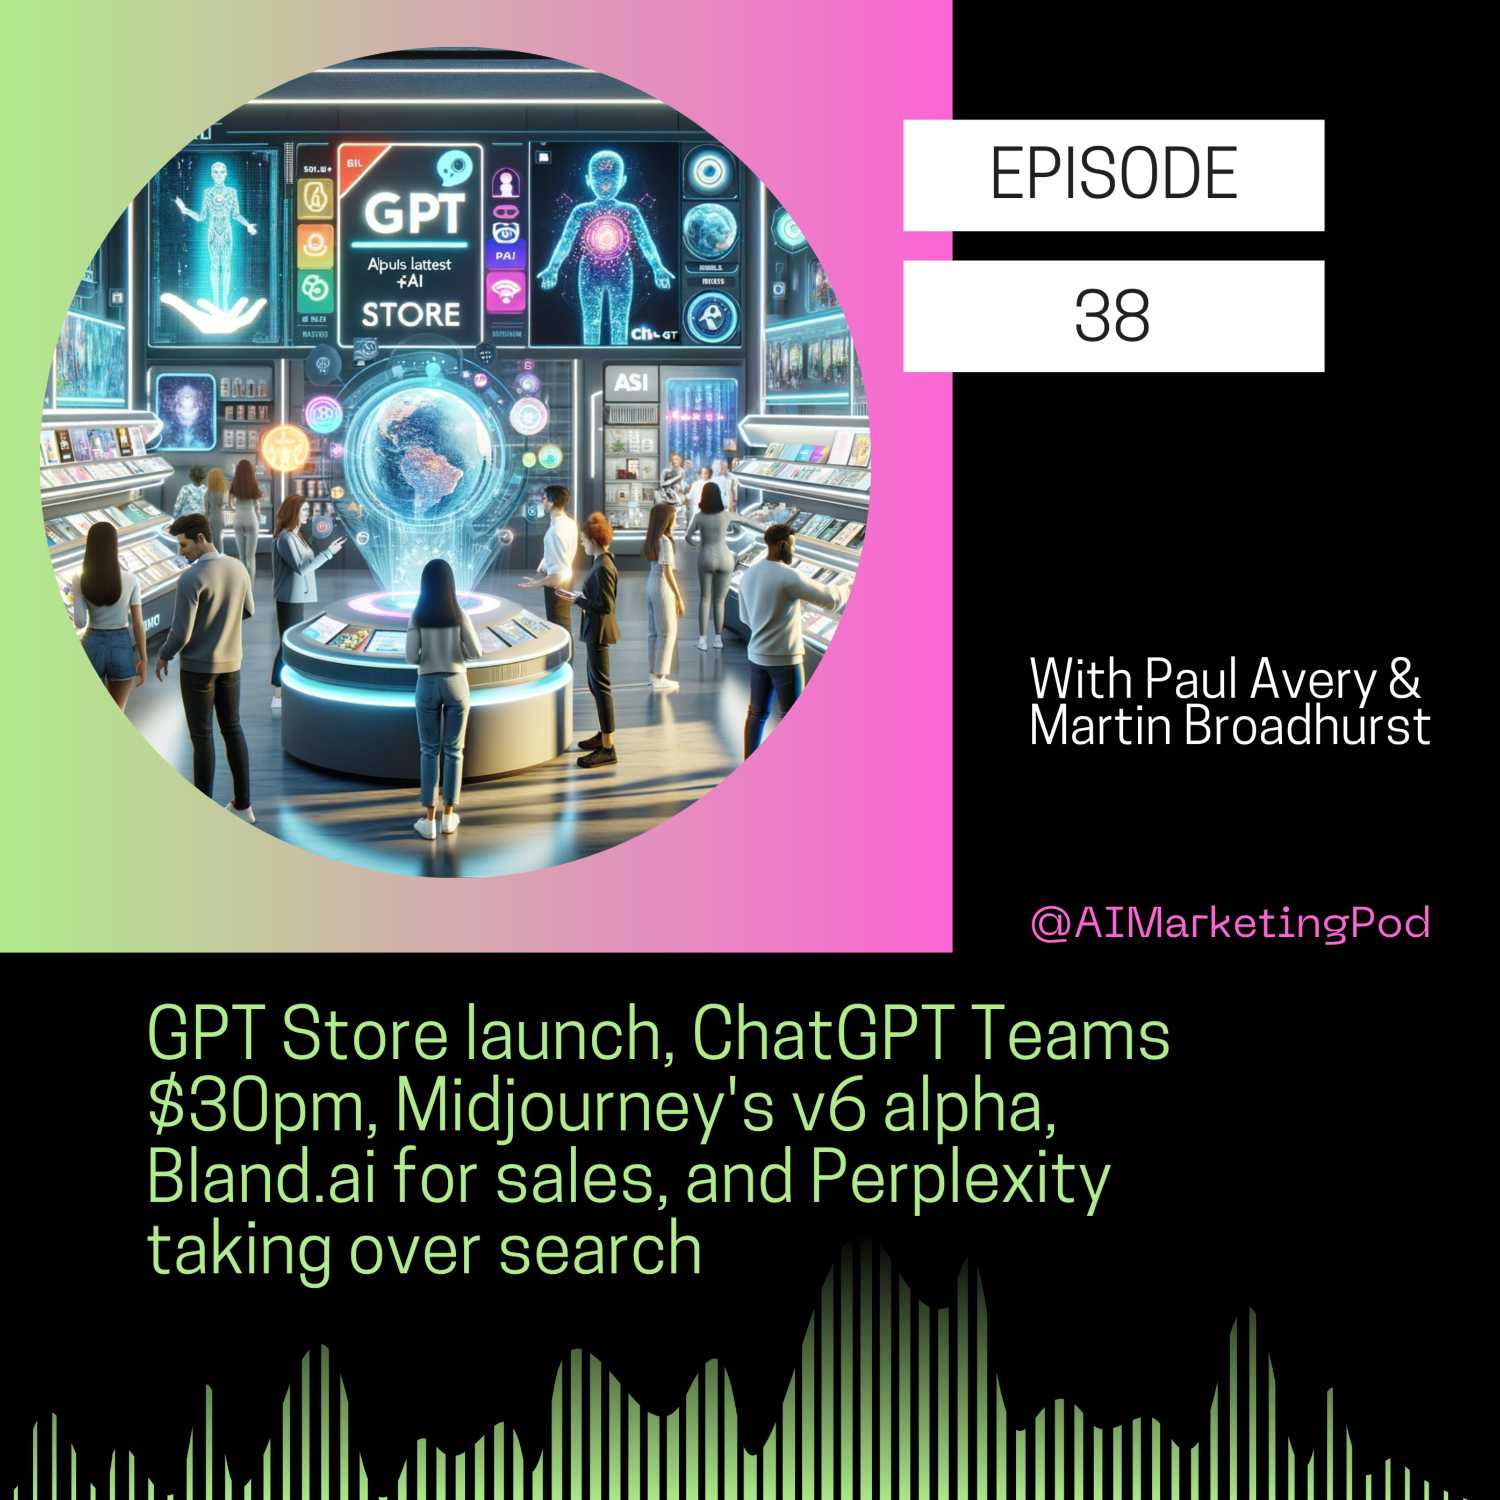 GPT Store launch, ChatGPT Teams $30pm, Midjourney's v6 alpha, Bland.ai for sales, and Perplexity taking over search